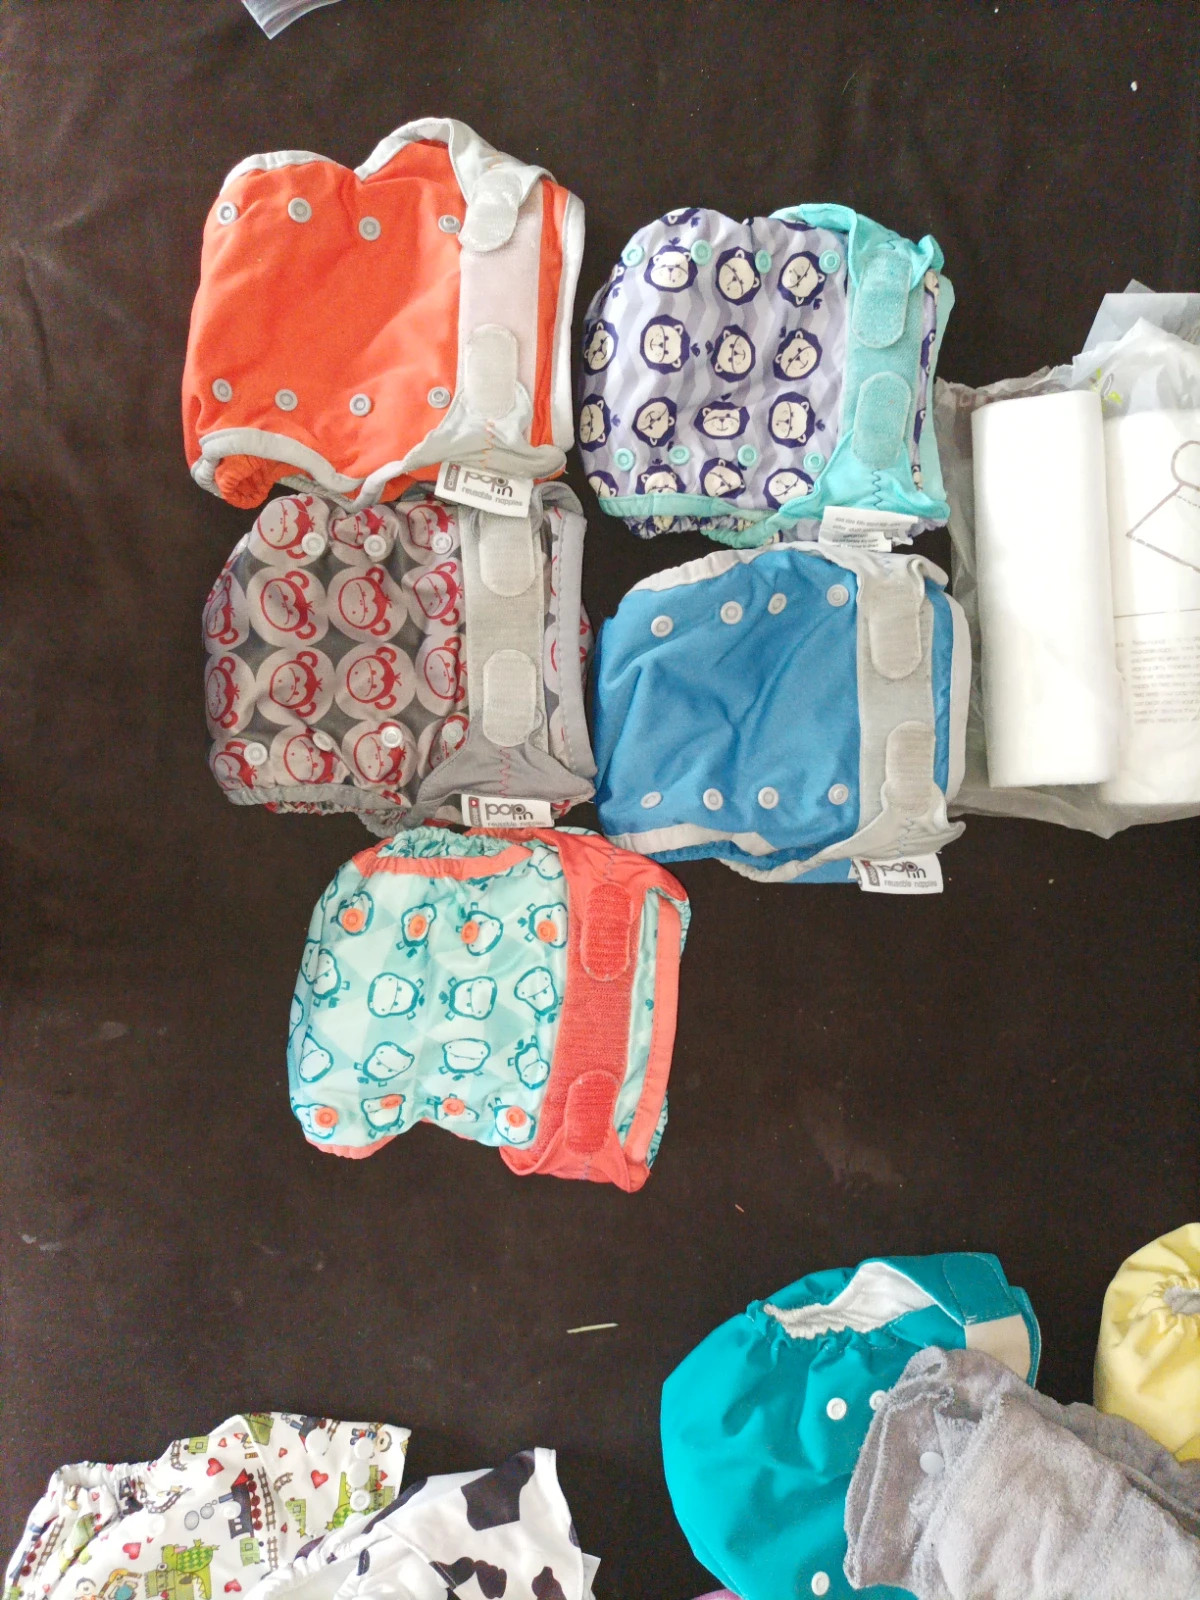 pieluchy pampers aktiv baby dry 3